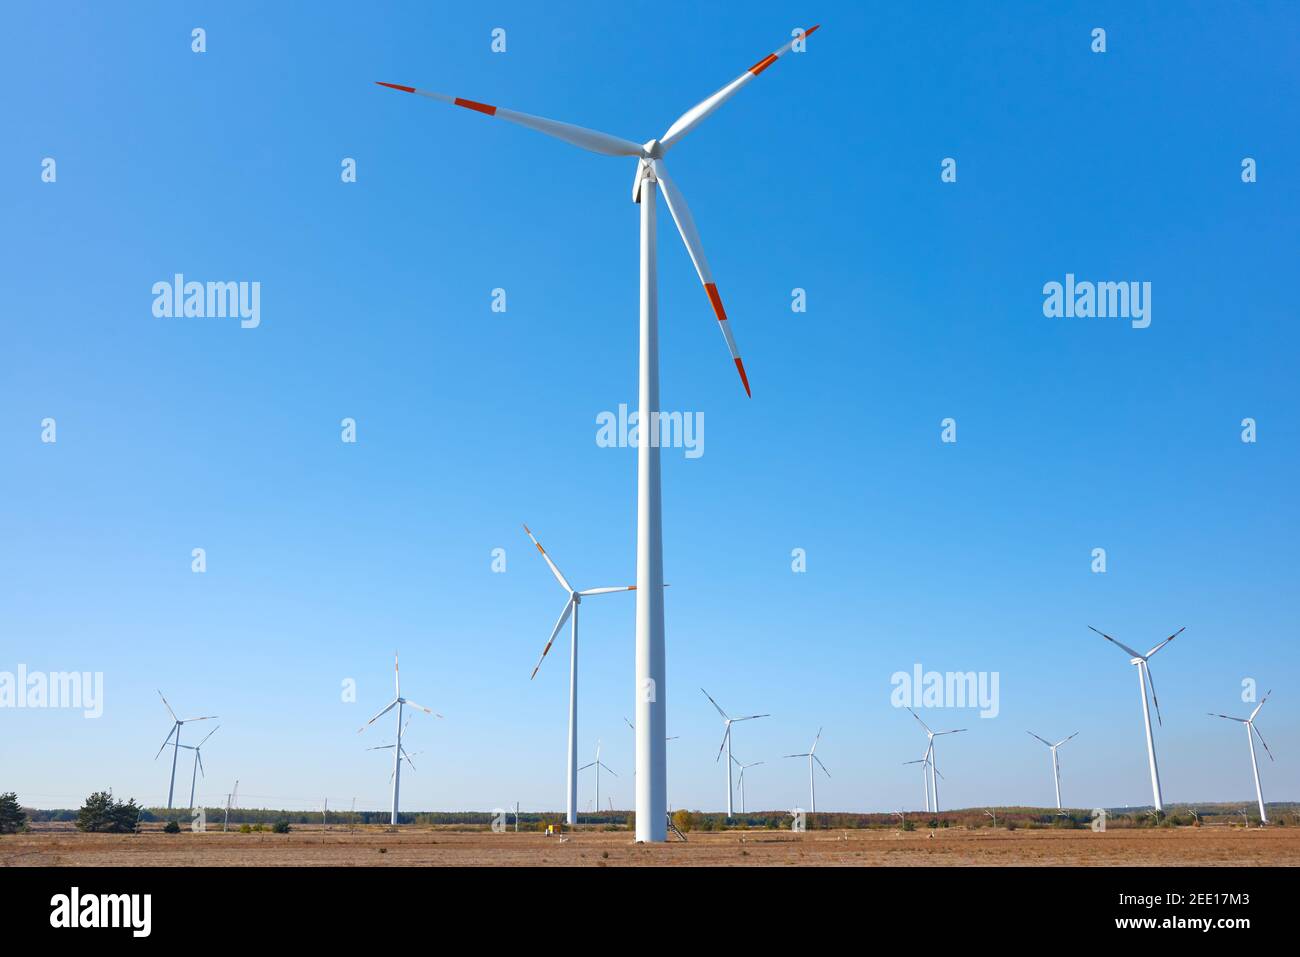 Picture of a wind turbine farm against the blue sky. Stock Photo